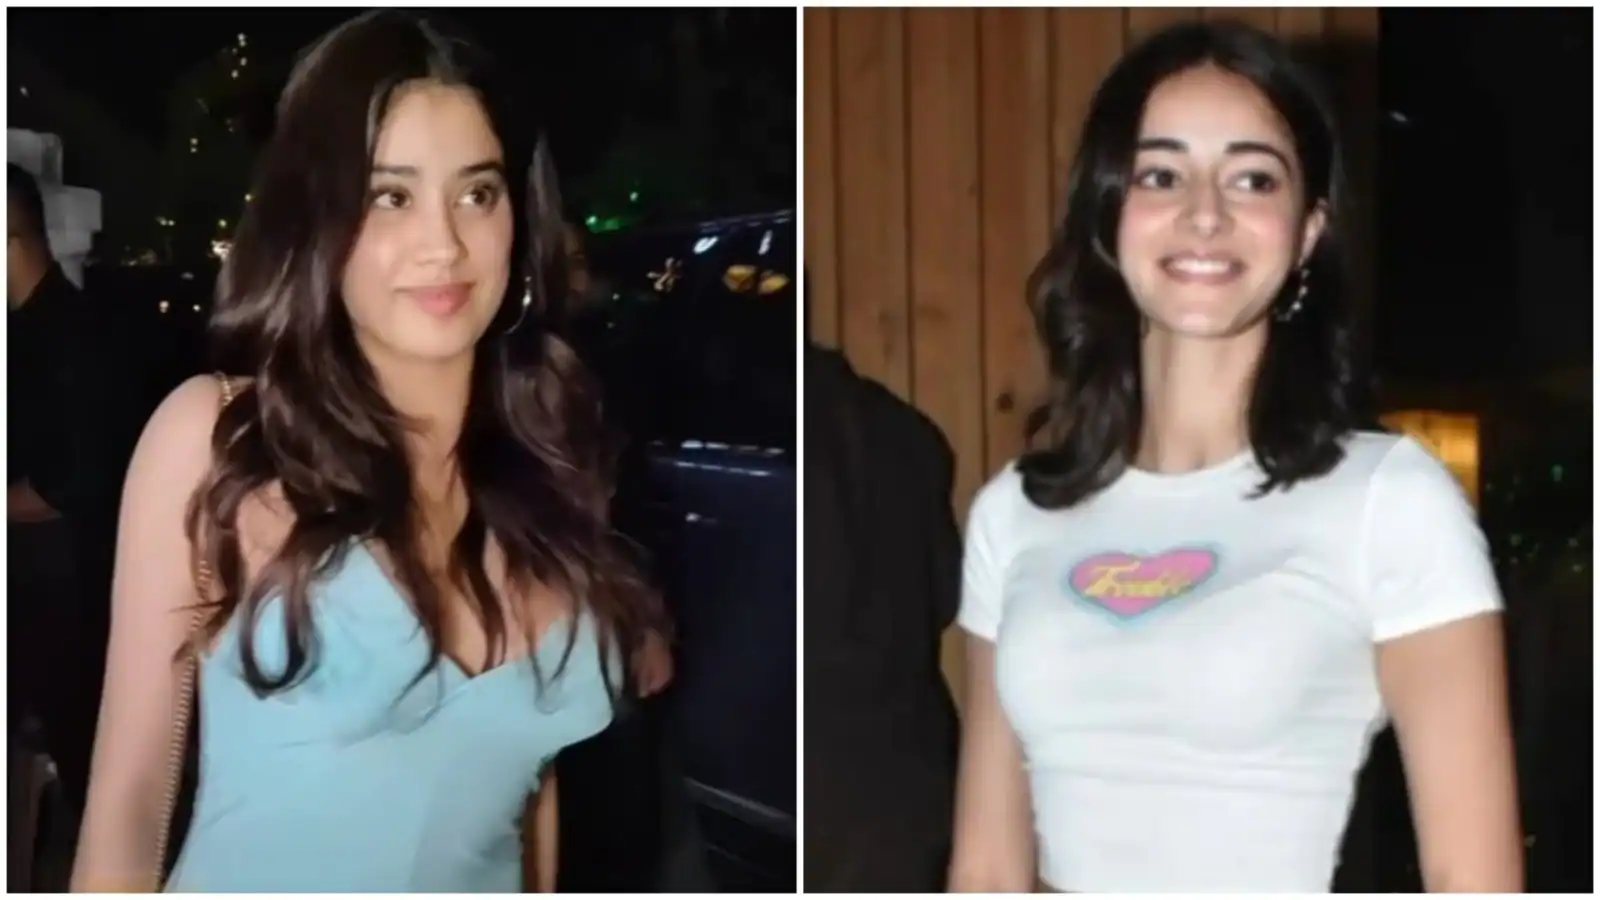 Janhvi Kapoor, Ananya Panday, and Shanaya Kapoor step out for dinner date; fans wonder if they discussed Ishaan Khatter